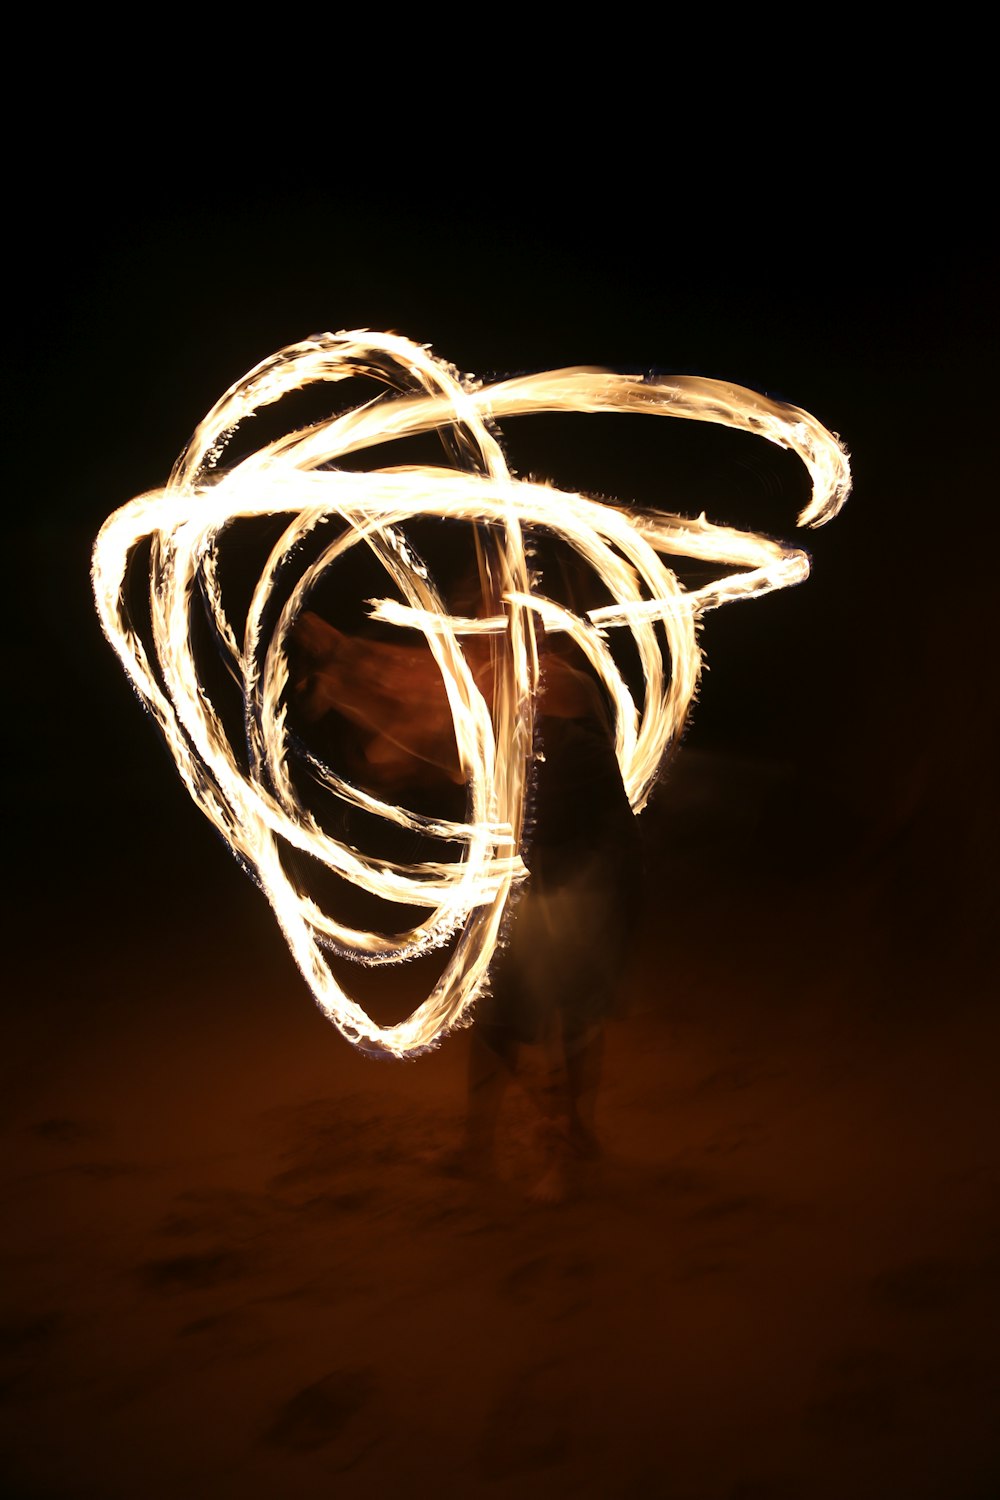 fire dancing at night time